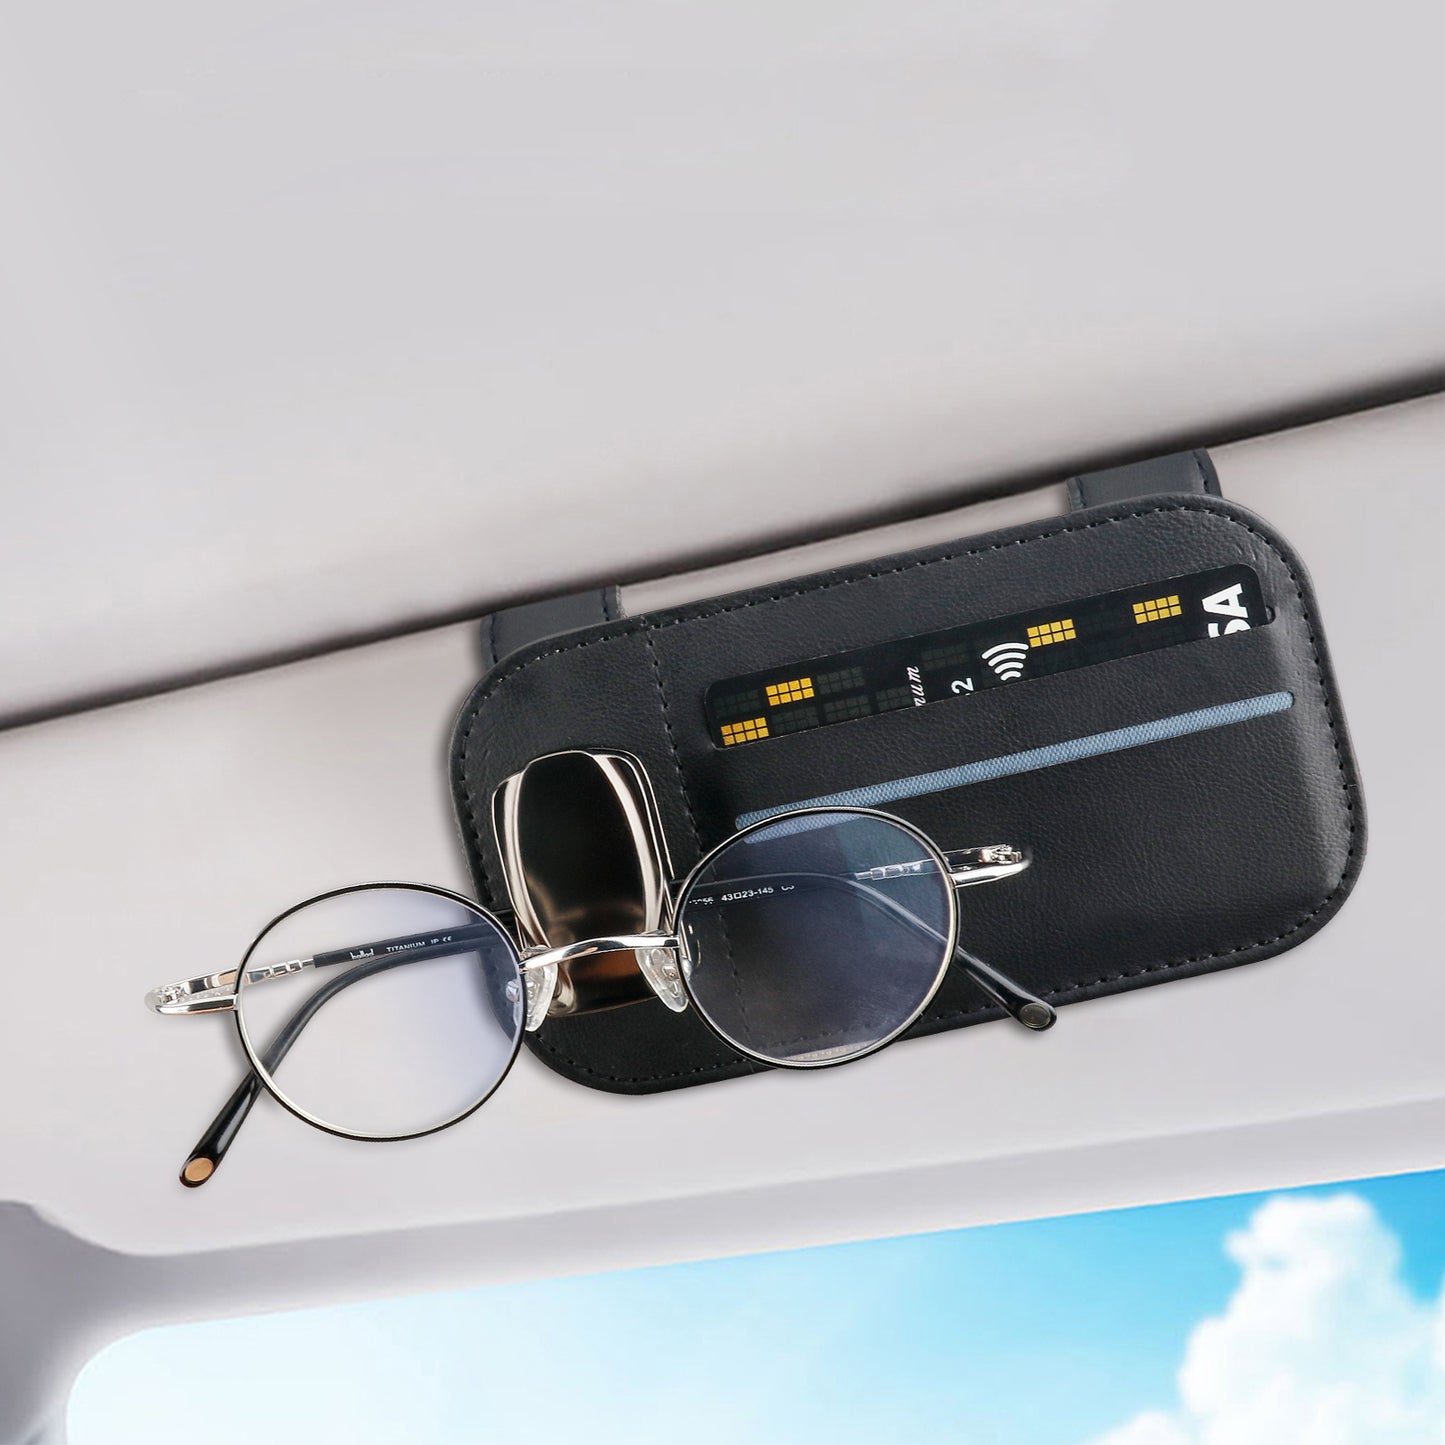 TOOVREN Sunglass Holder for Car, Sunglasses Clip with 2 Card Slots, Universal Eyeglass Hanger Clip for Car Visor, PU Leather Car Interior Visor Accessories Suitable for Different Size Eyeglasses